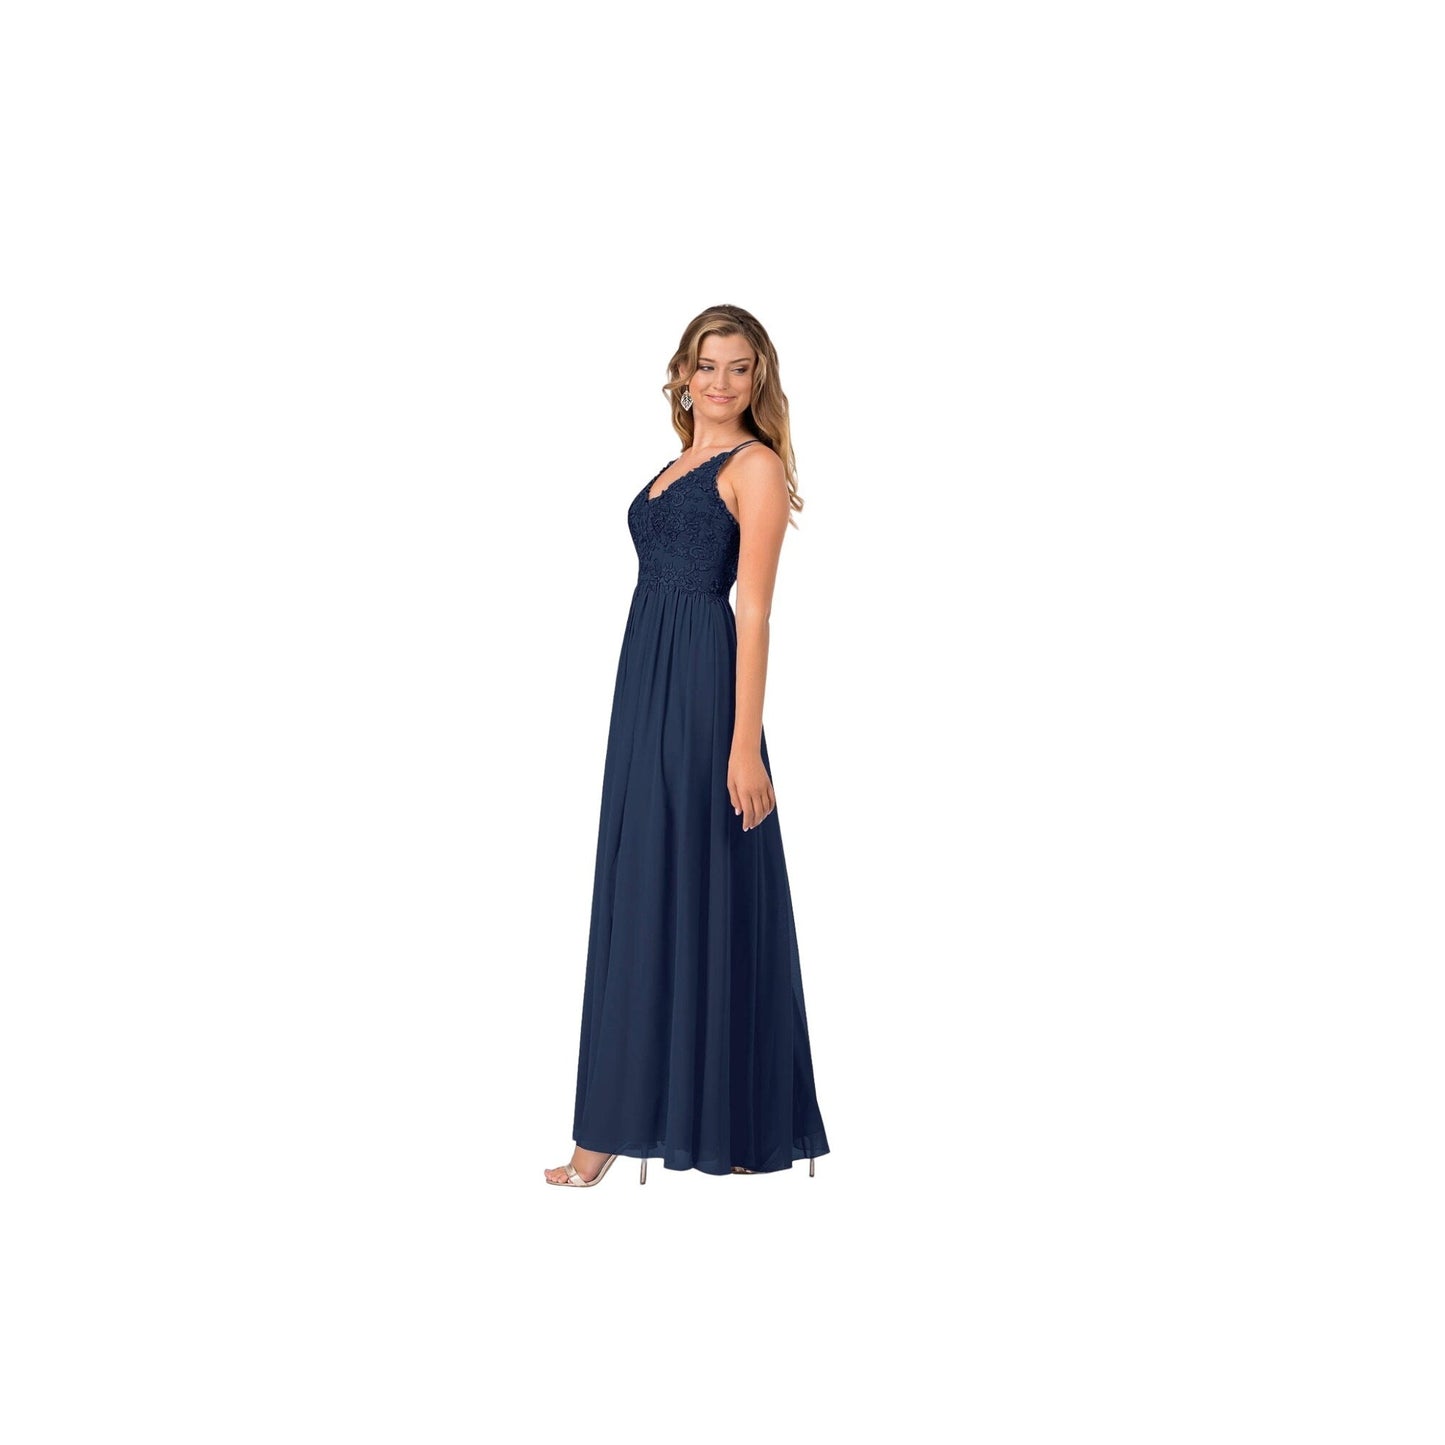 Azazie NWT Sonya Deep Navy Blue Formal Chiffon and Lace Gown